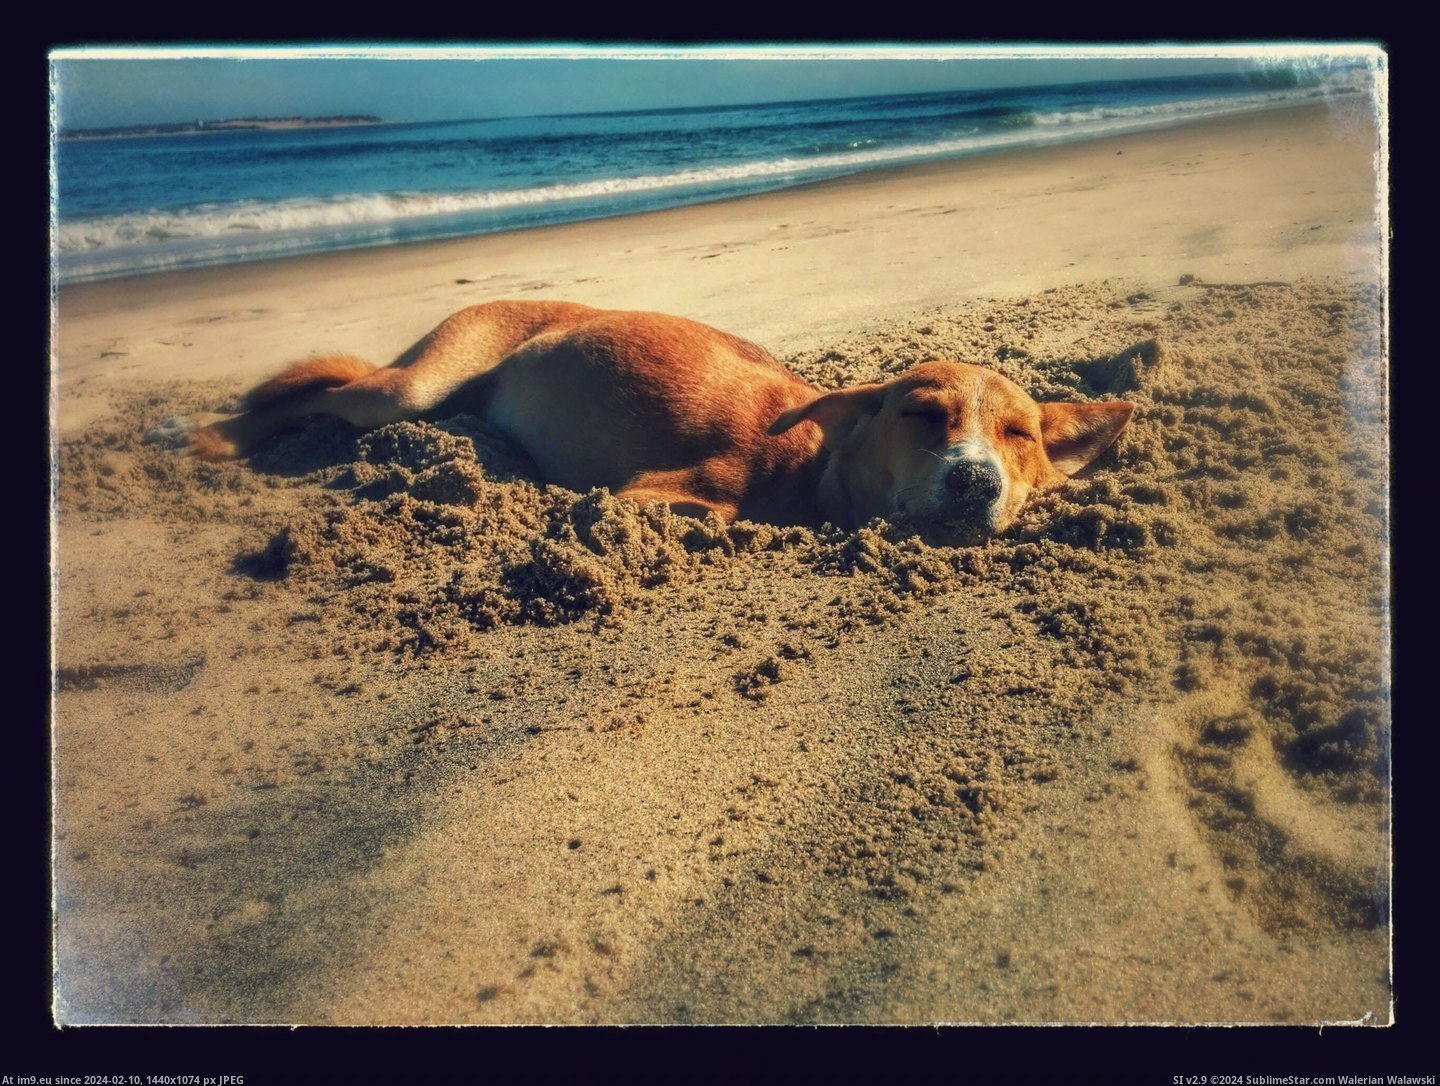 #Guy #Beach #Hole #Lanka #Sri #Dug #Sitting #Sleep #Visited [Aww] I visited Sri-Lanka recently, while sitting on the beach this guy came and dug a hole next to us, got in and went to sleep Pic. (Bild von album My r/AWW favs))